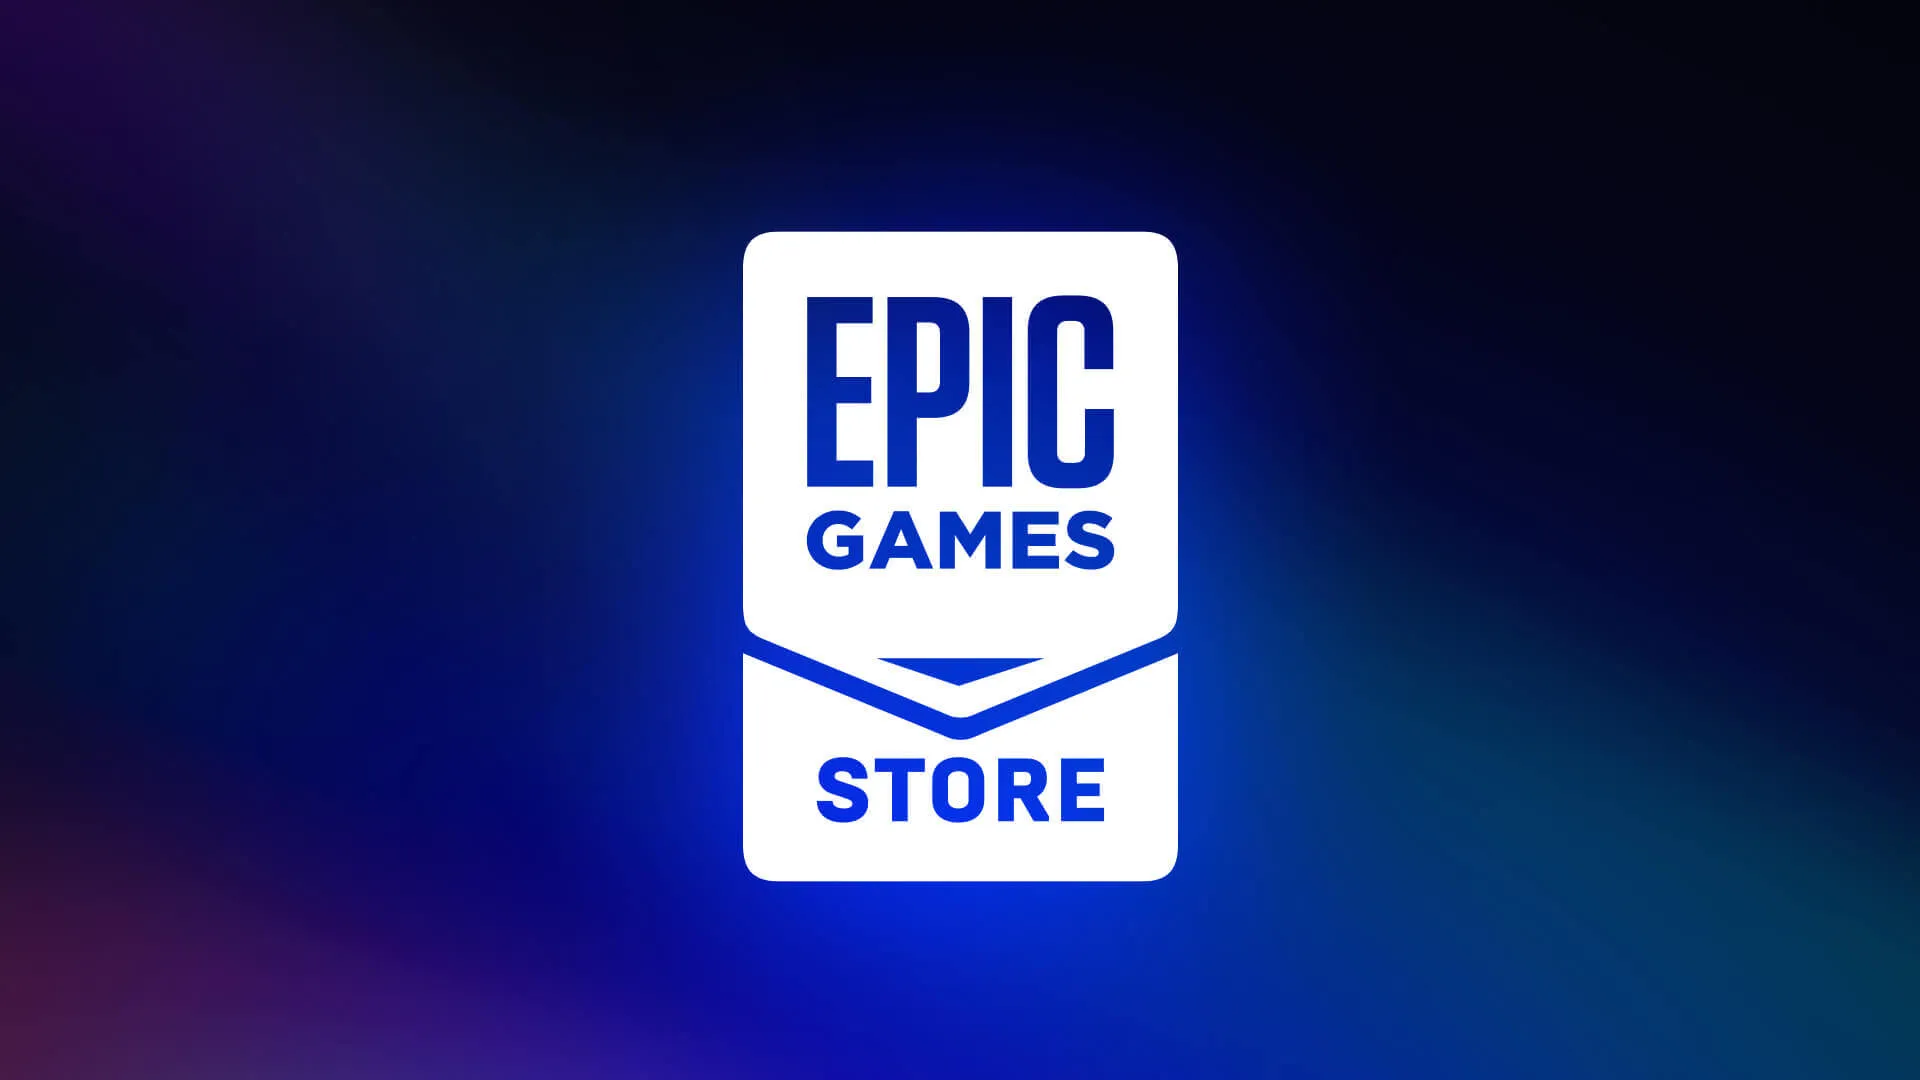 Epic Game Wallpapers Group 80